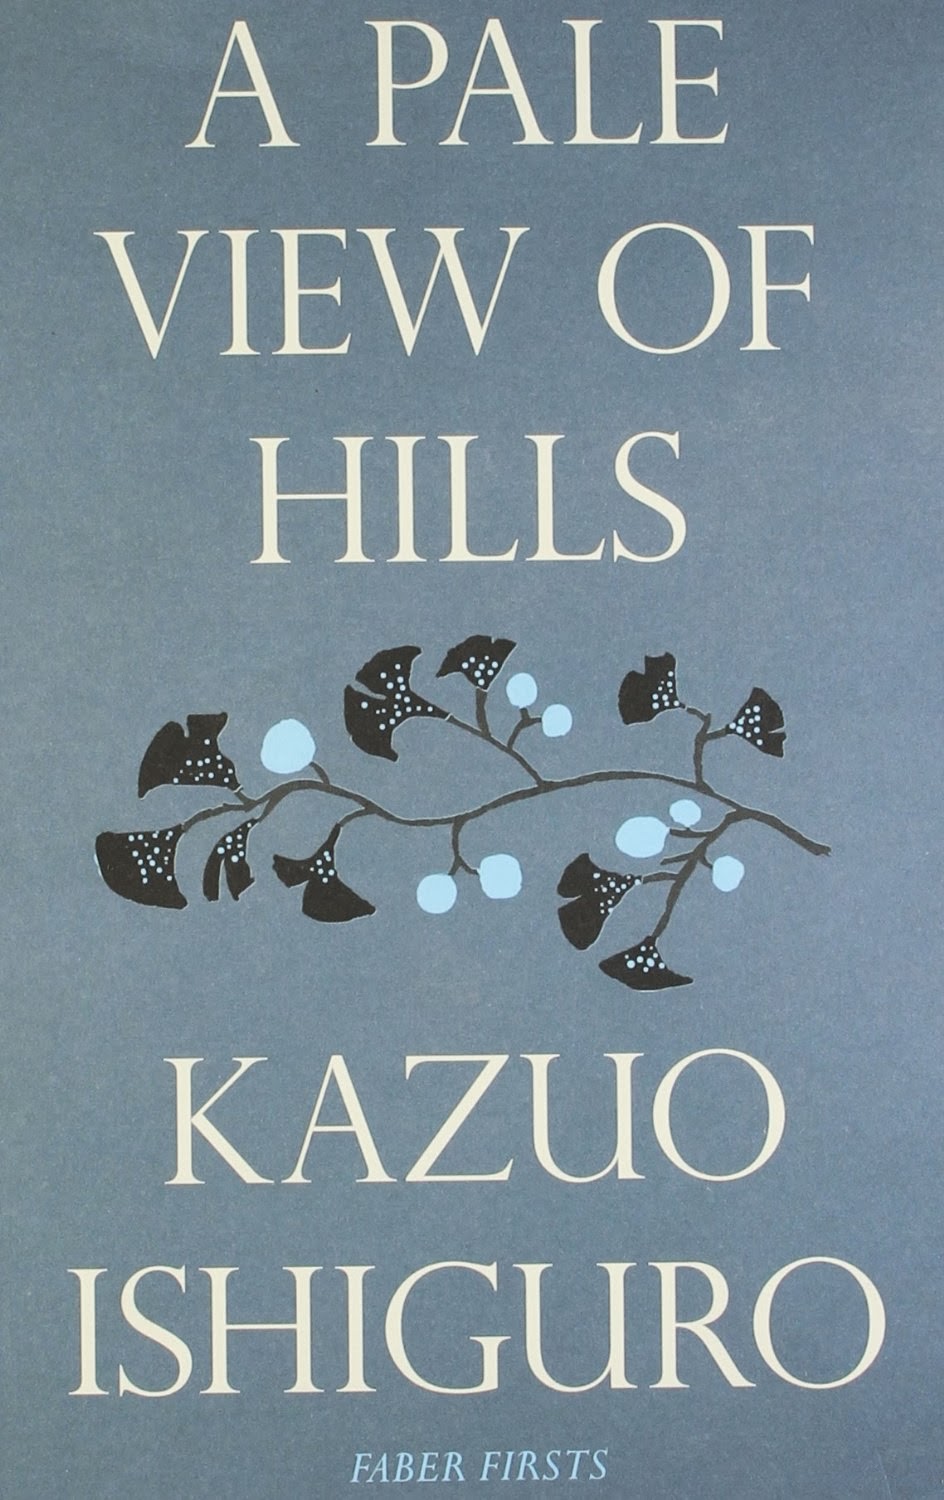 Book cover for A Pale View of Hills by Kazuo Ishiguro A Pale View of Hills in the South Manchester, Chorlton, Cheadle, Fallowfield, Burnage, Levenshulme, Heaton Moor, Heaton Mersey, Heaton Norris, Heaton Chapel, Northenden, and Didsbury book group